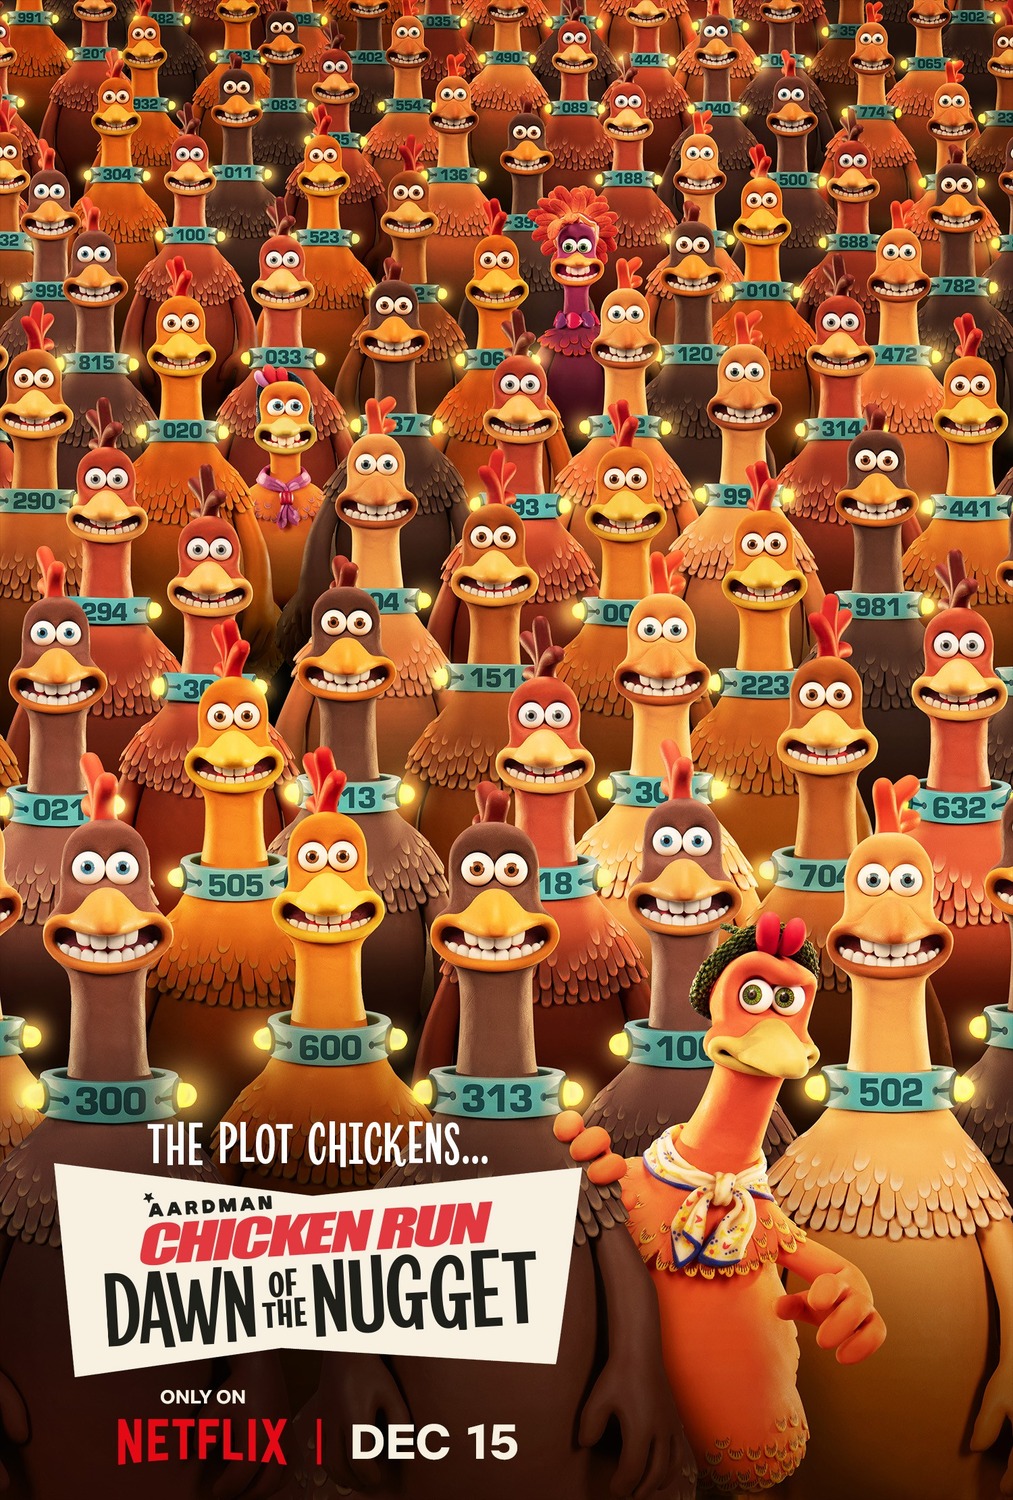 Extra Large Movie Poster Image for Chicken Run: Dawn of the Nugget (#11 of 11)